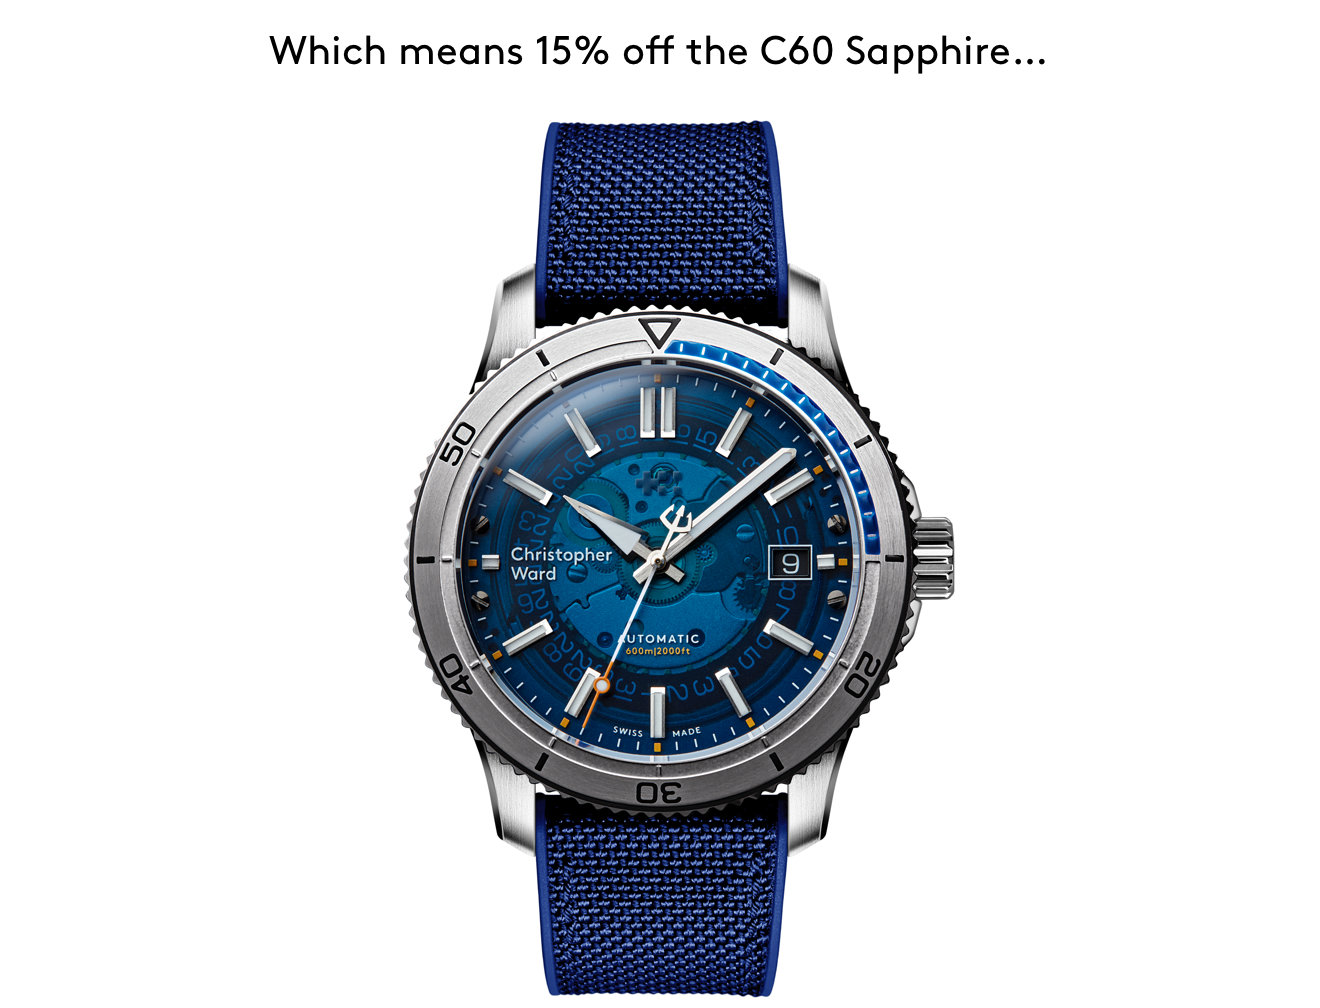 Which means 15% off the C60 Sapphire...